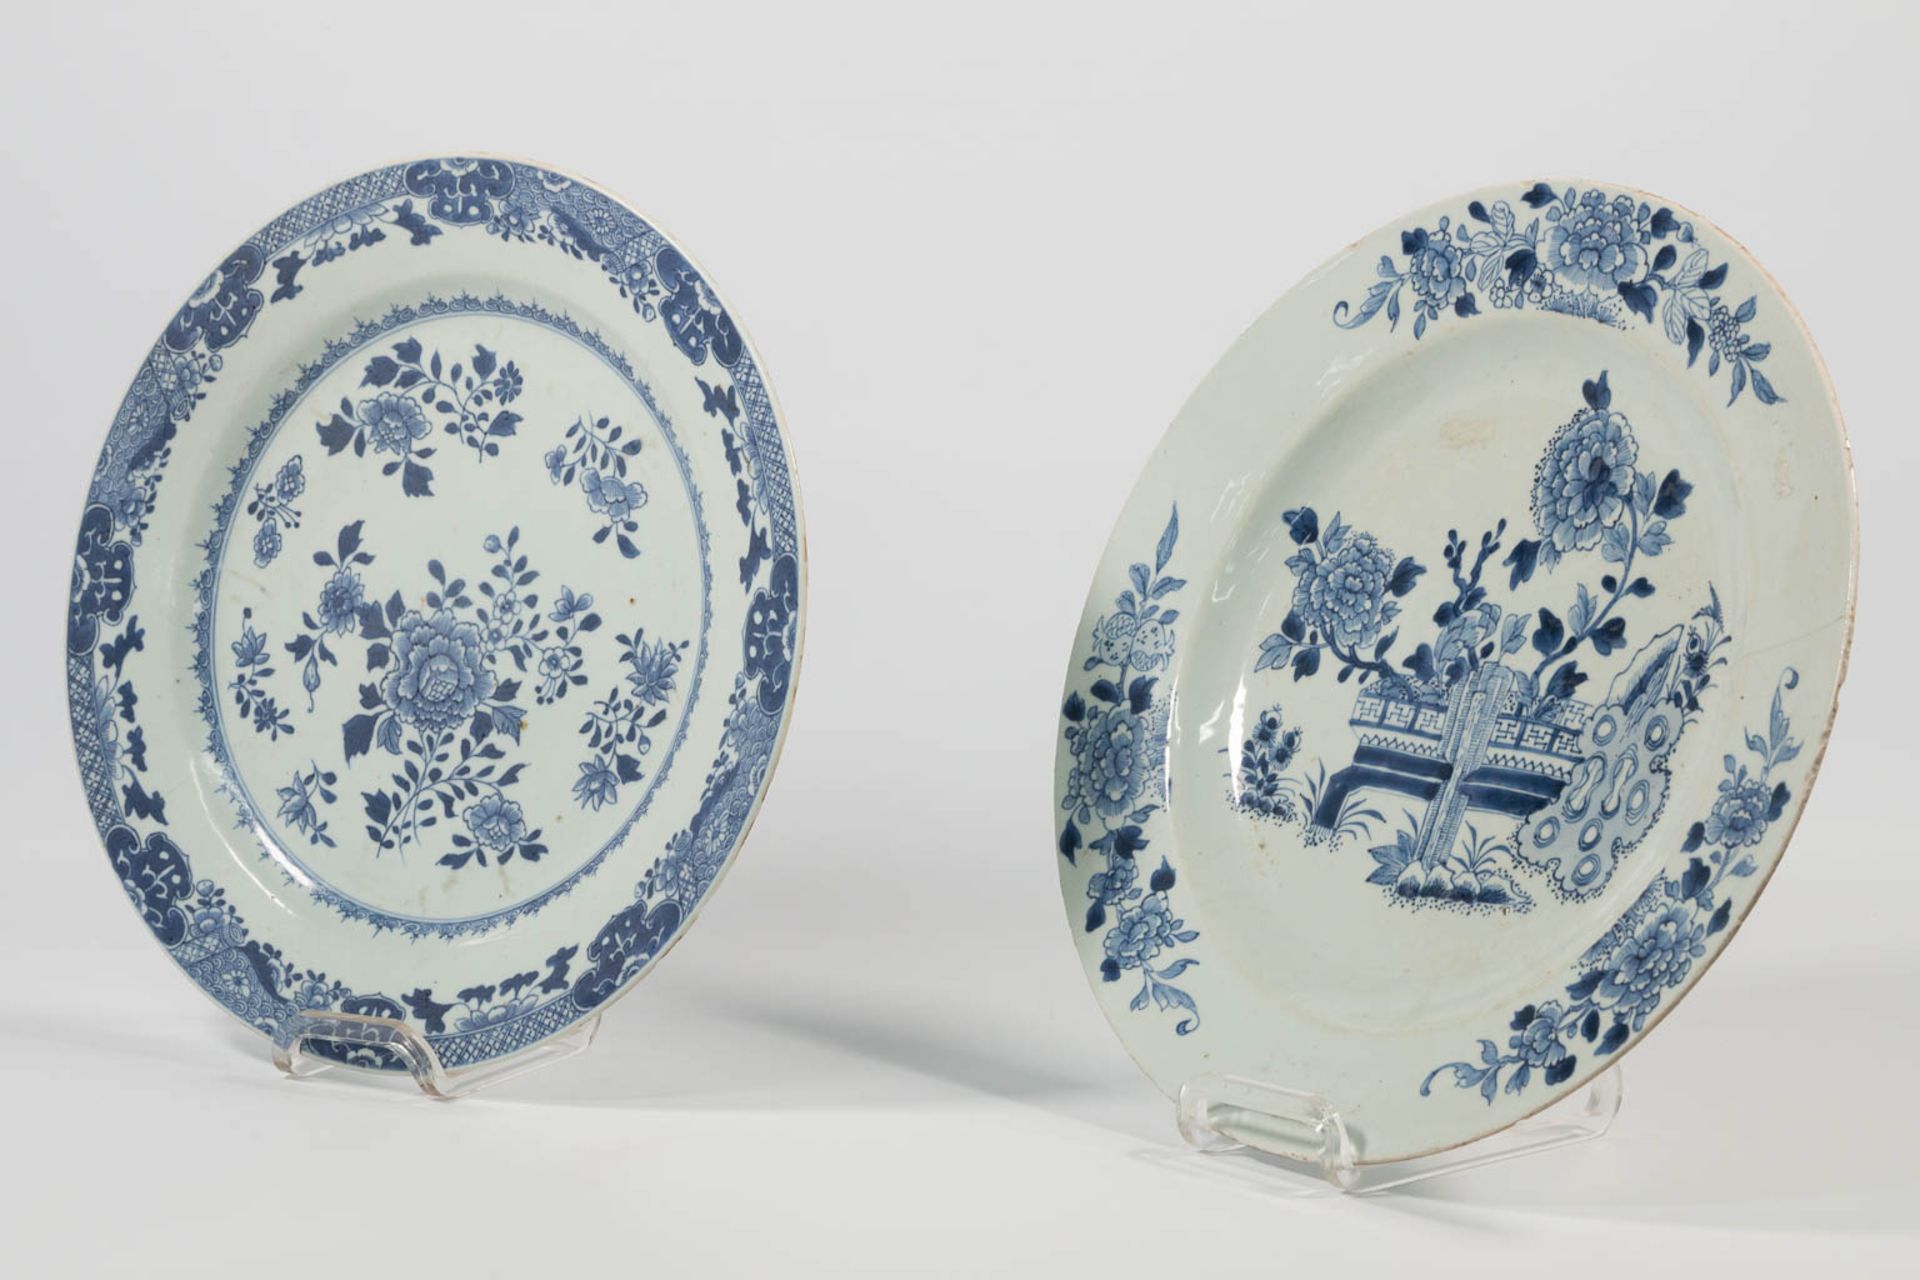 A blue and white Chinese Vase with symbolic decor, combined with 2 blue and white porcelain plates. - Image 28 of 33